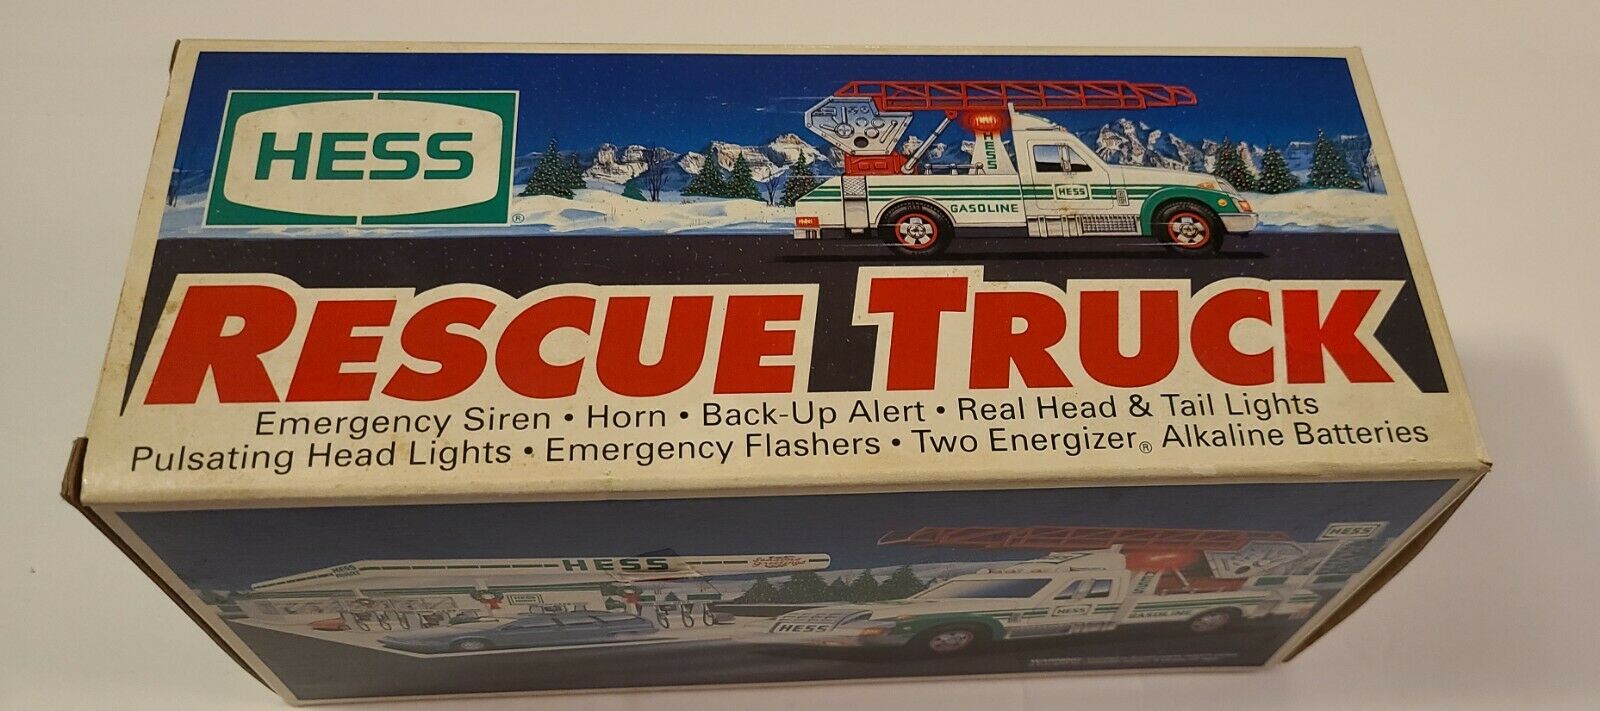 1994 Hess Rescue Truck - With Working Lights, Siren and Ladder!